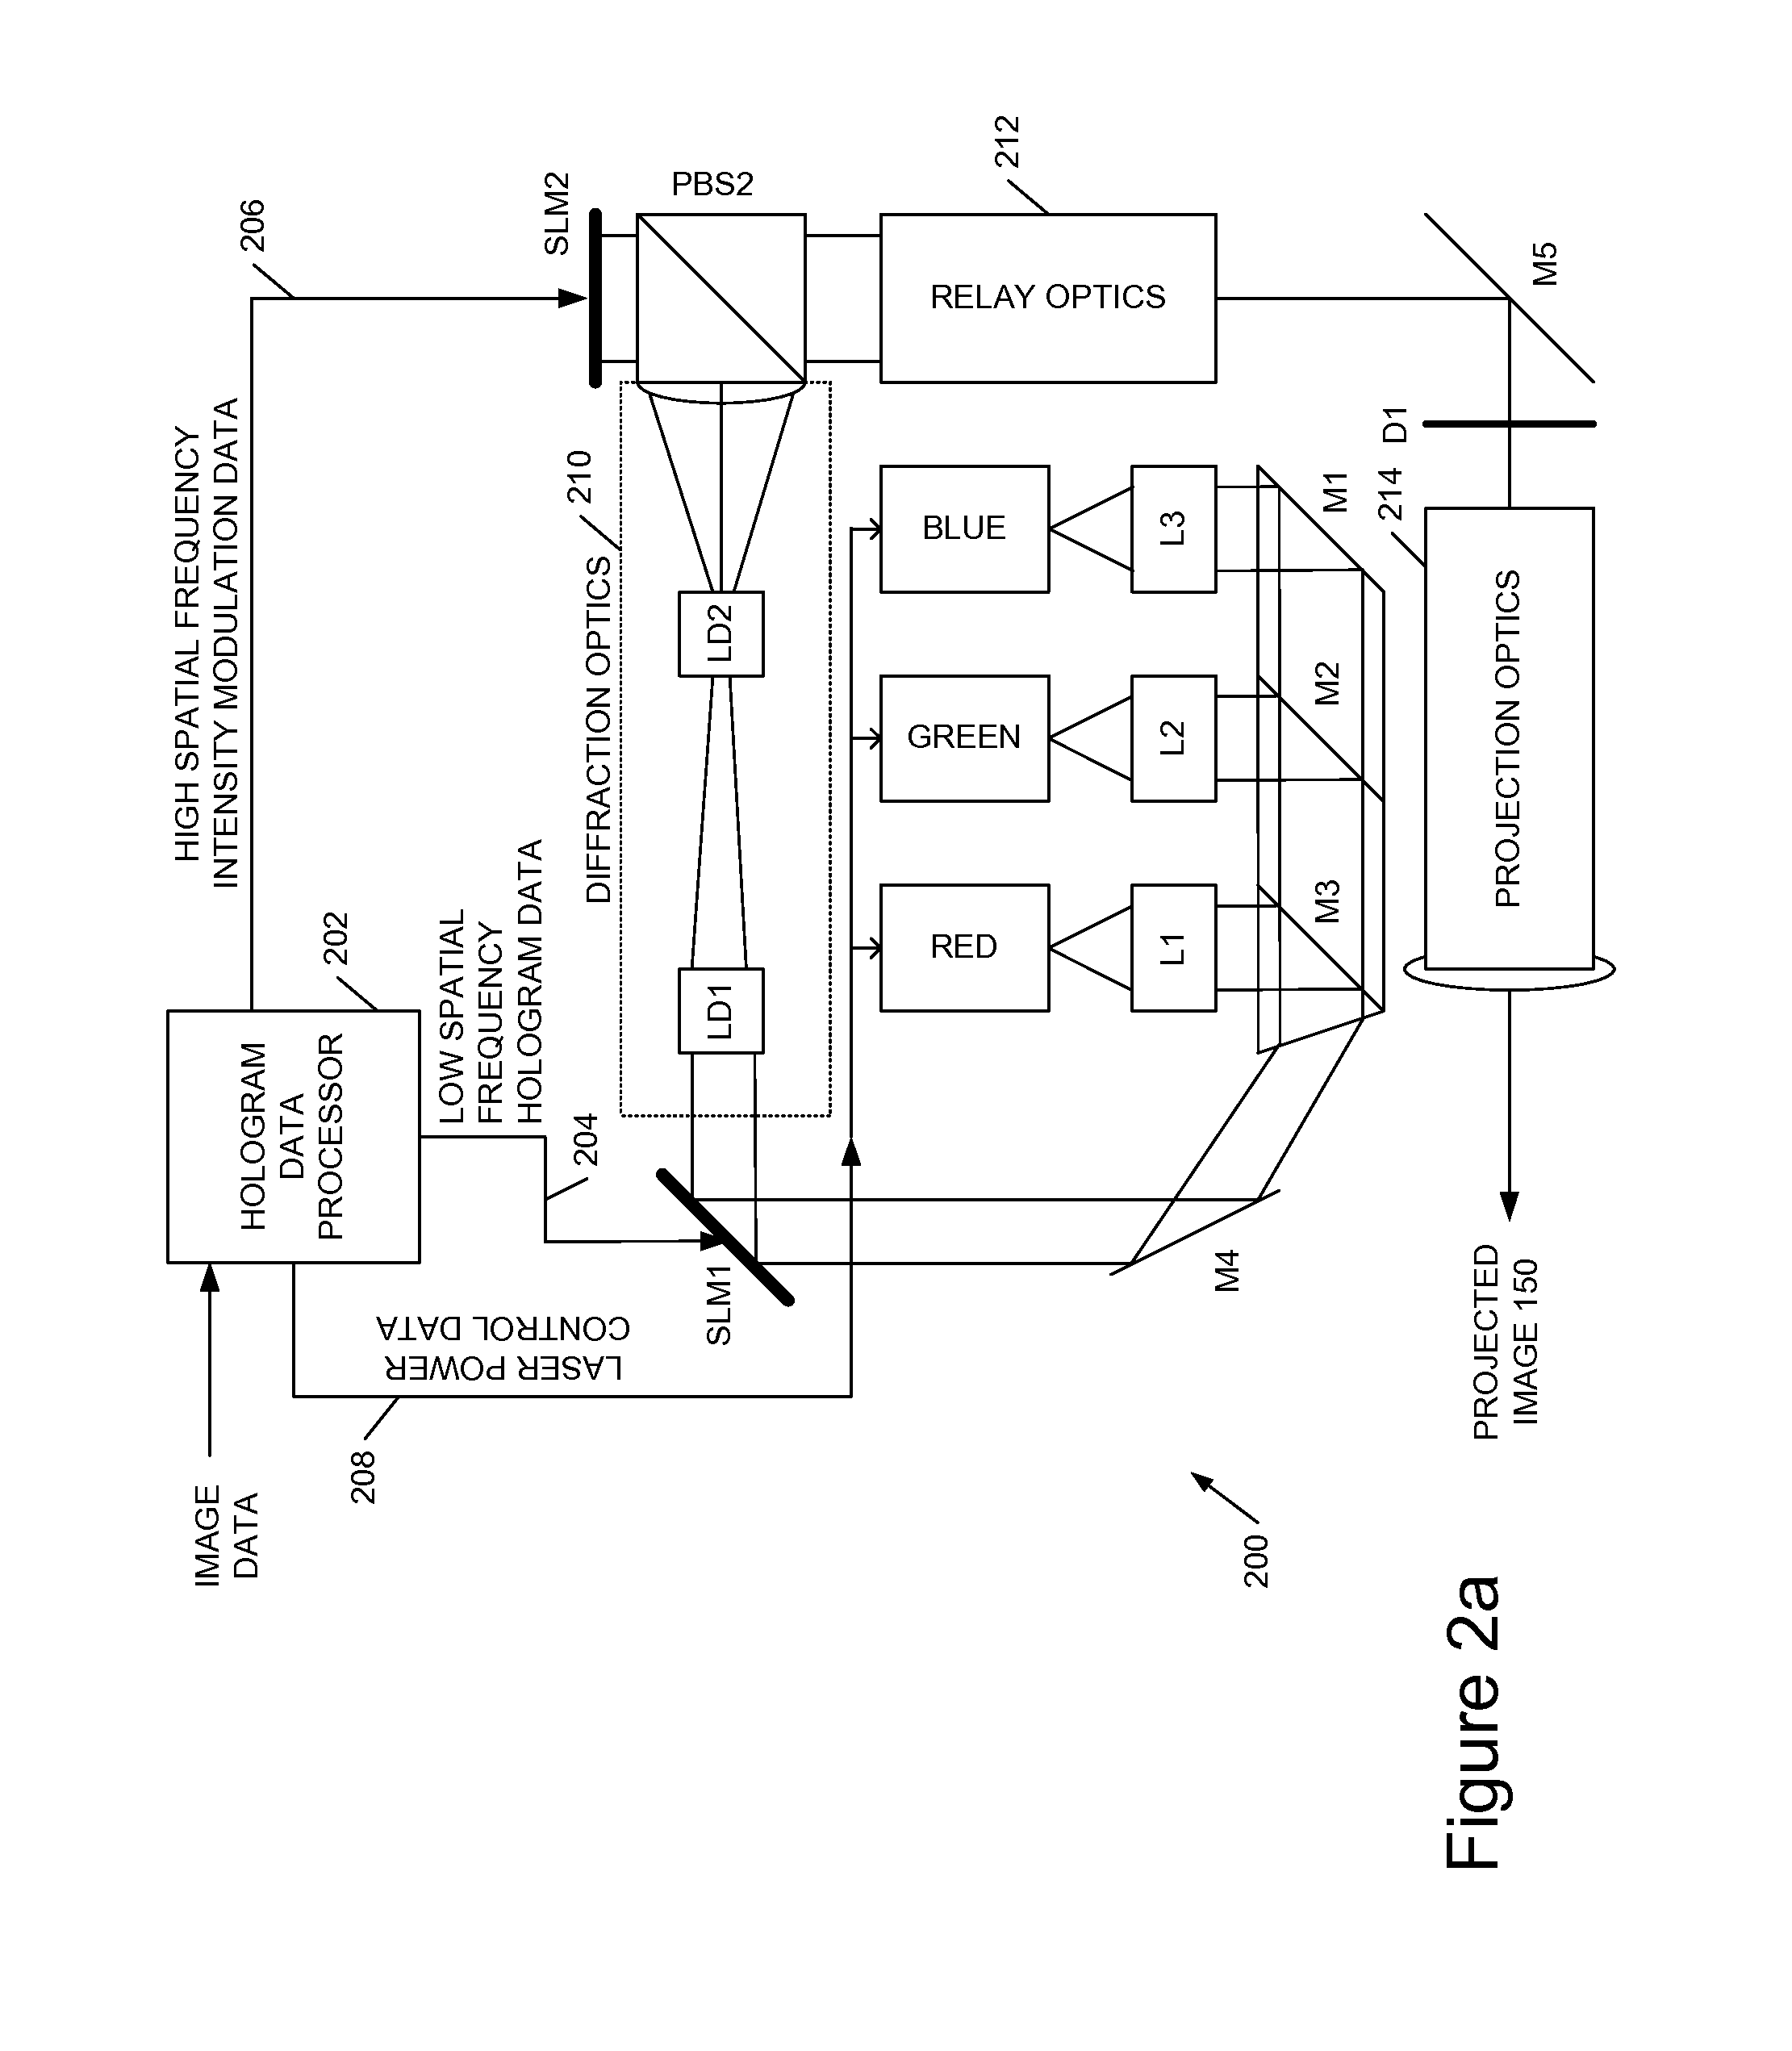 Image display systems